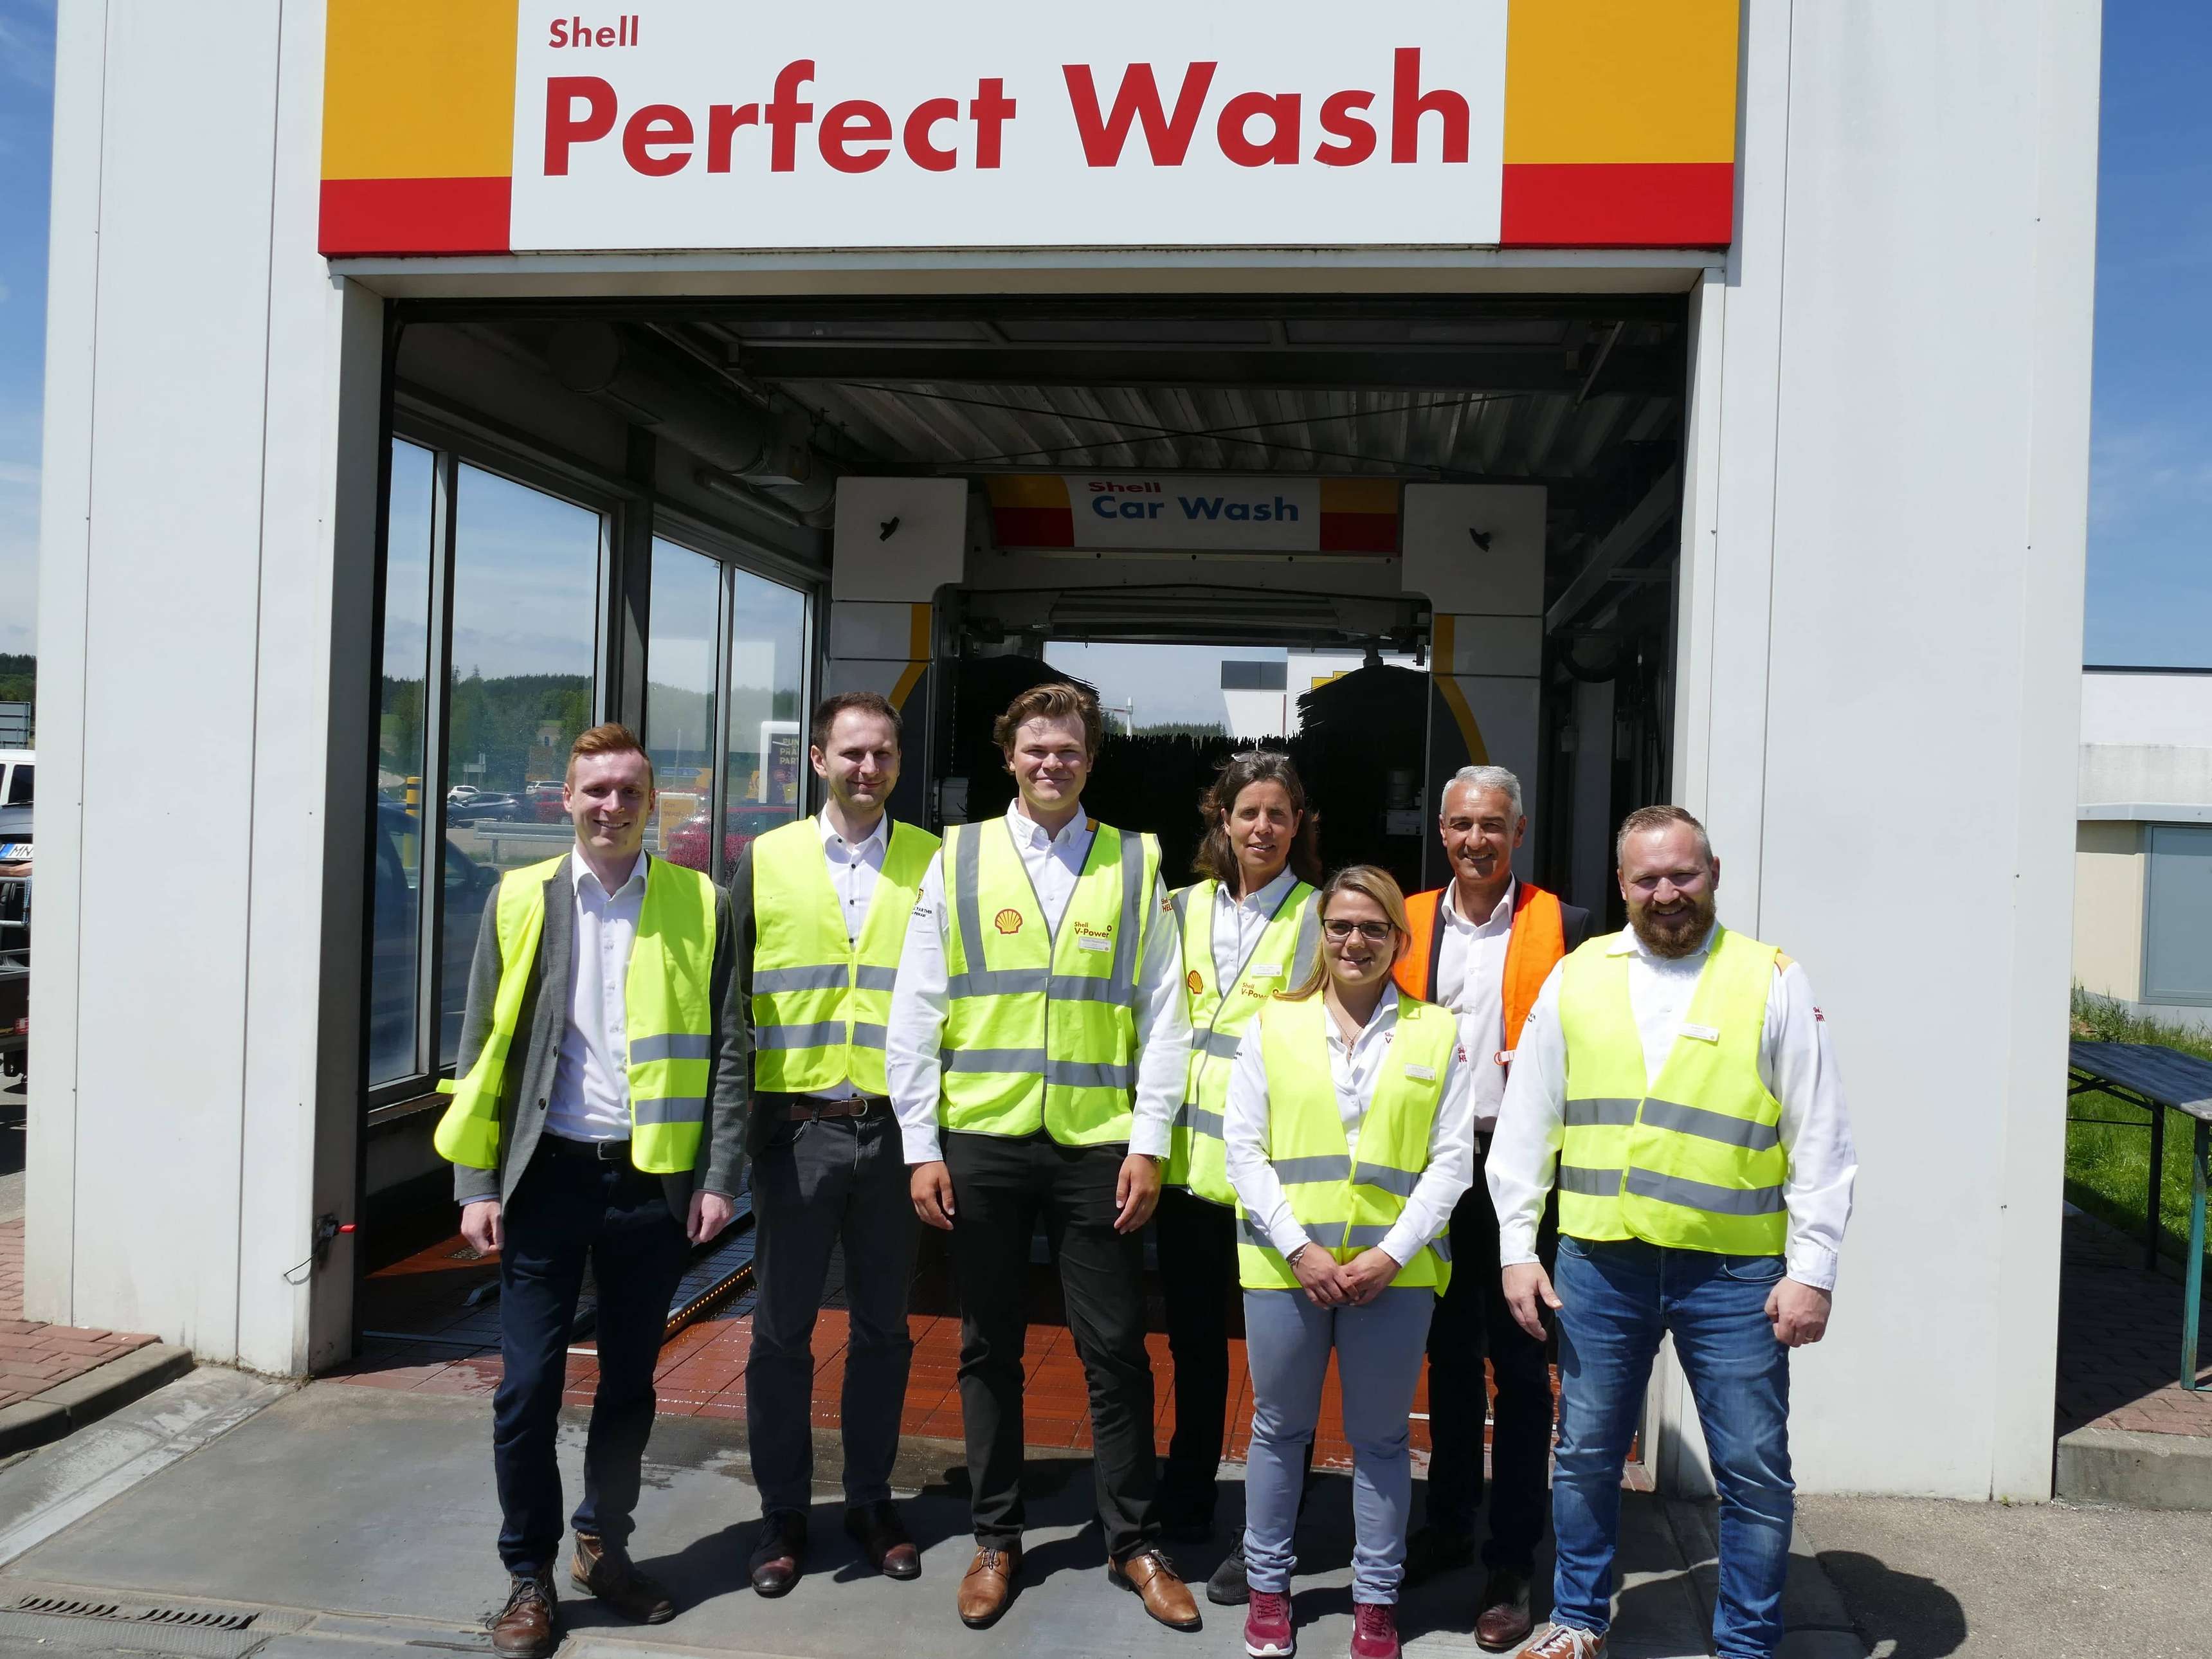 The glorious seven wash specialists: Christopher Wittmann, Simon Zettler (both from Christ), Florian Hassenpflug, Berit Köbe, Julia Ganser (all from Shell), Paolo Micciche (Christ) and tenant Andre Pilz (from left). © Picture Hans Rongisch